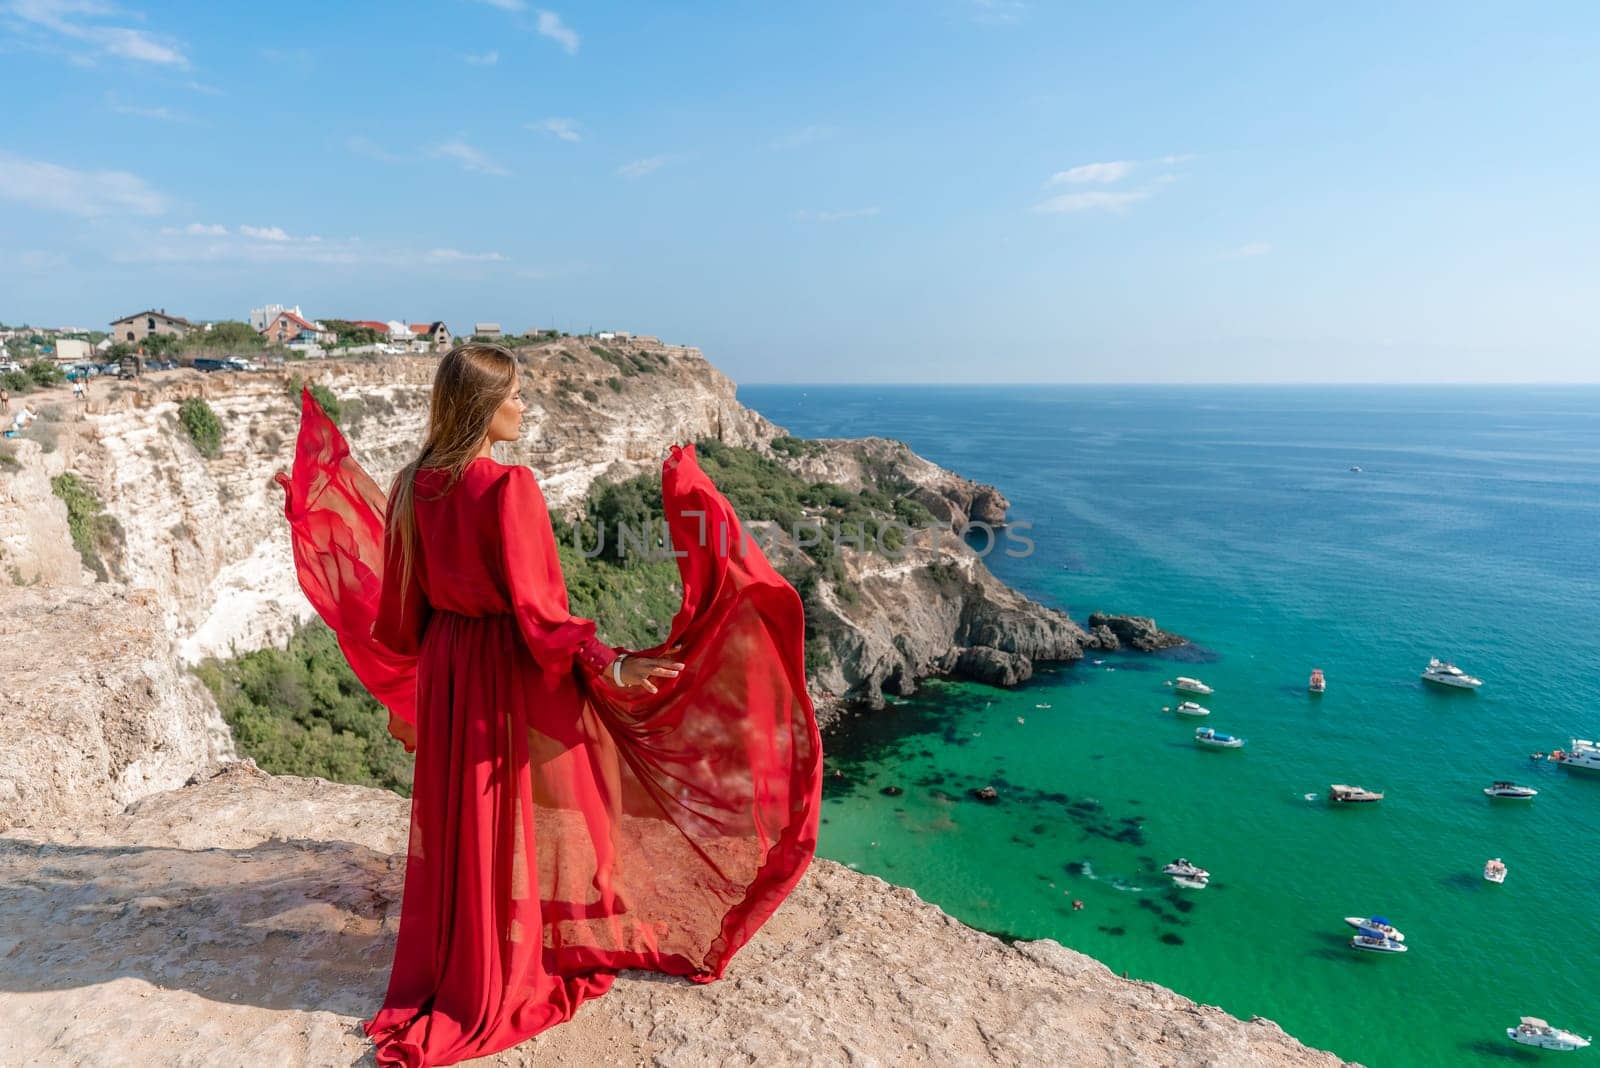 Red Dress Woman sea Cliff. A beautiful woman in a red dress and white swimsuit poses on a cliff overlooking the sea on a sunny day. Boats and yachts dot the background